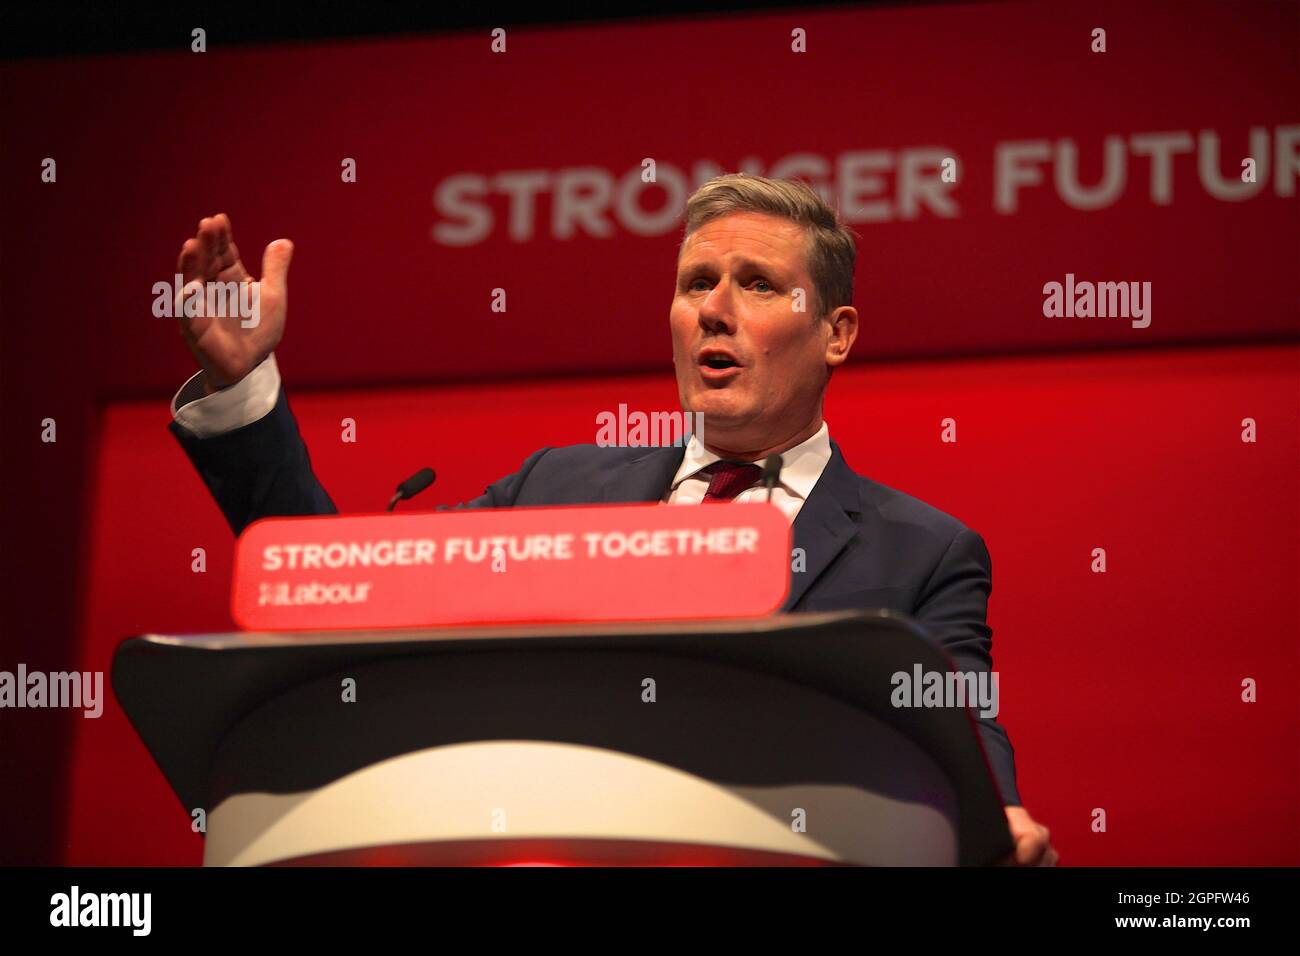 Brighton, UK 29th September 2021: Sir Keir Starmer gives his leaders speech at the Labour Party's Conference. Stock Photo